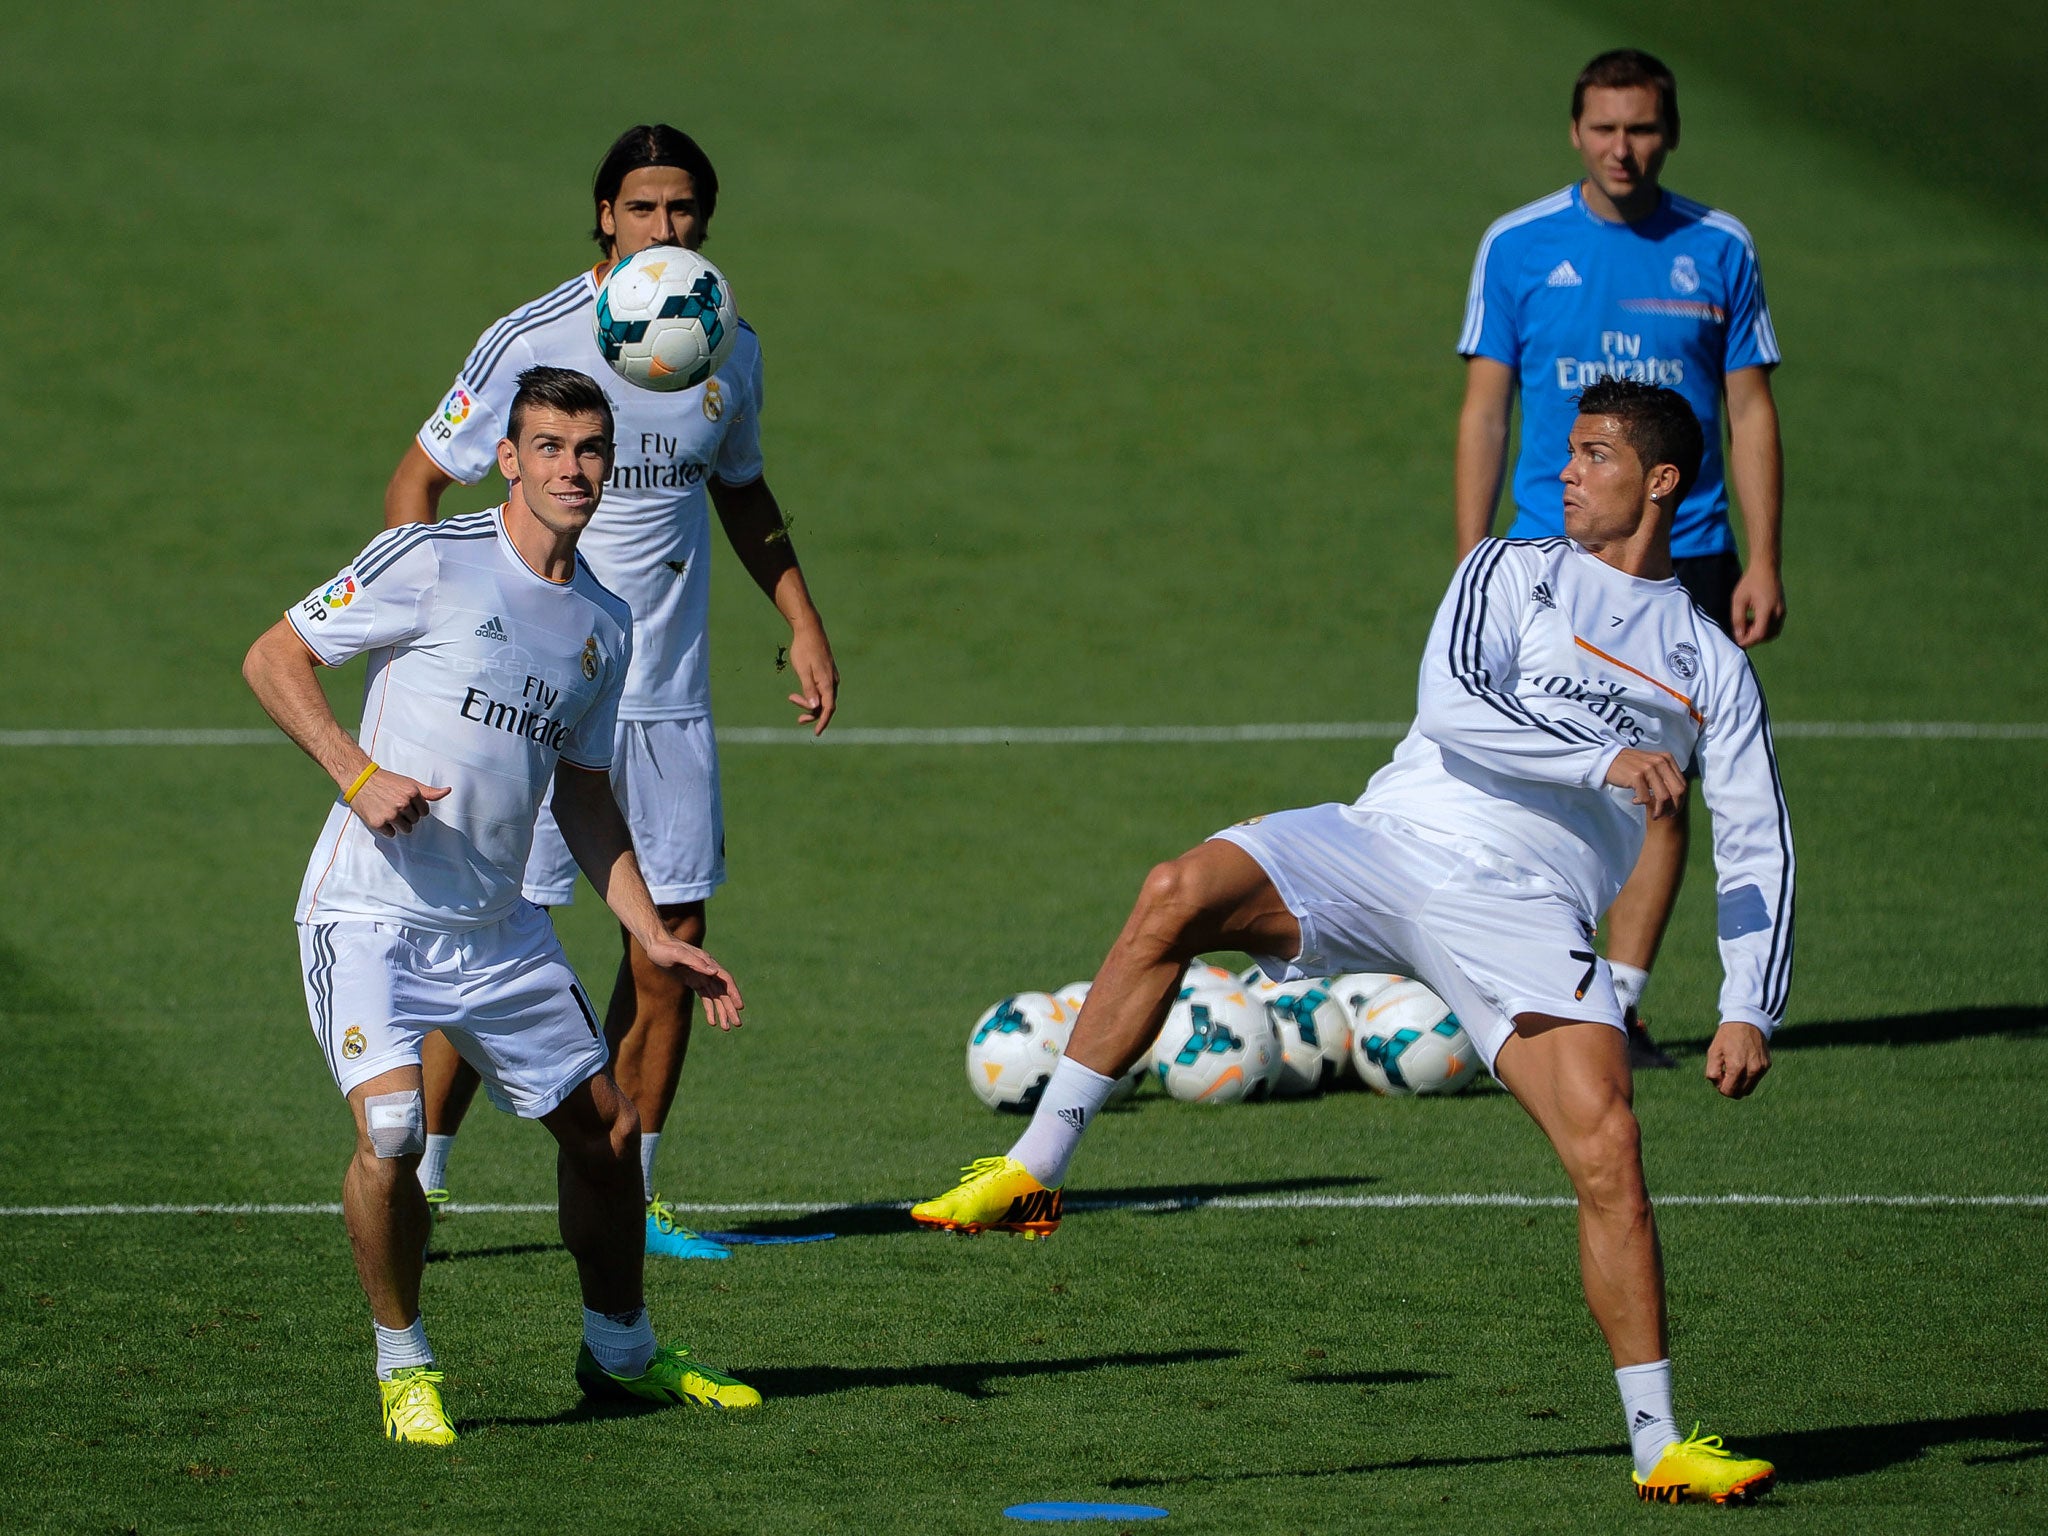 Gareth Bale will make his Real Madrid debut this weekend